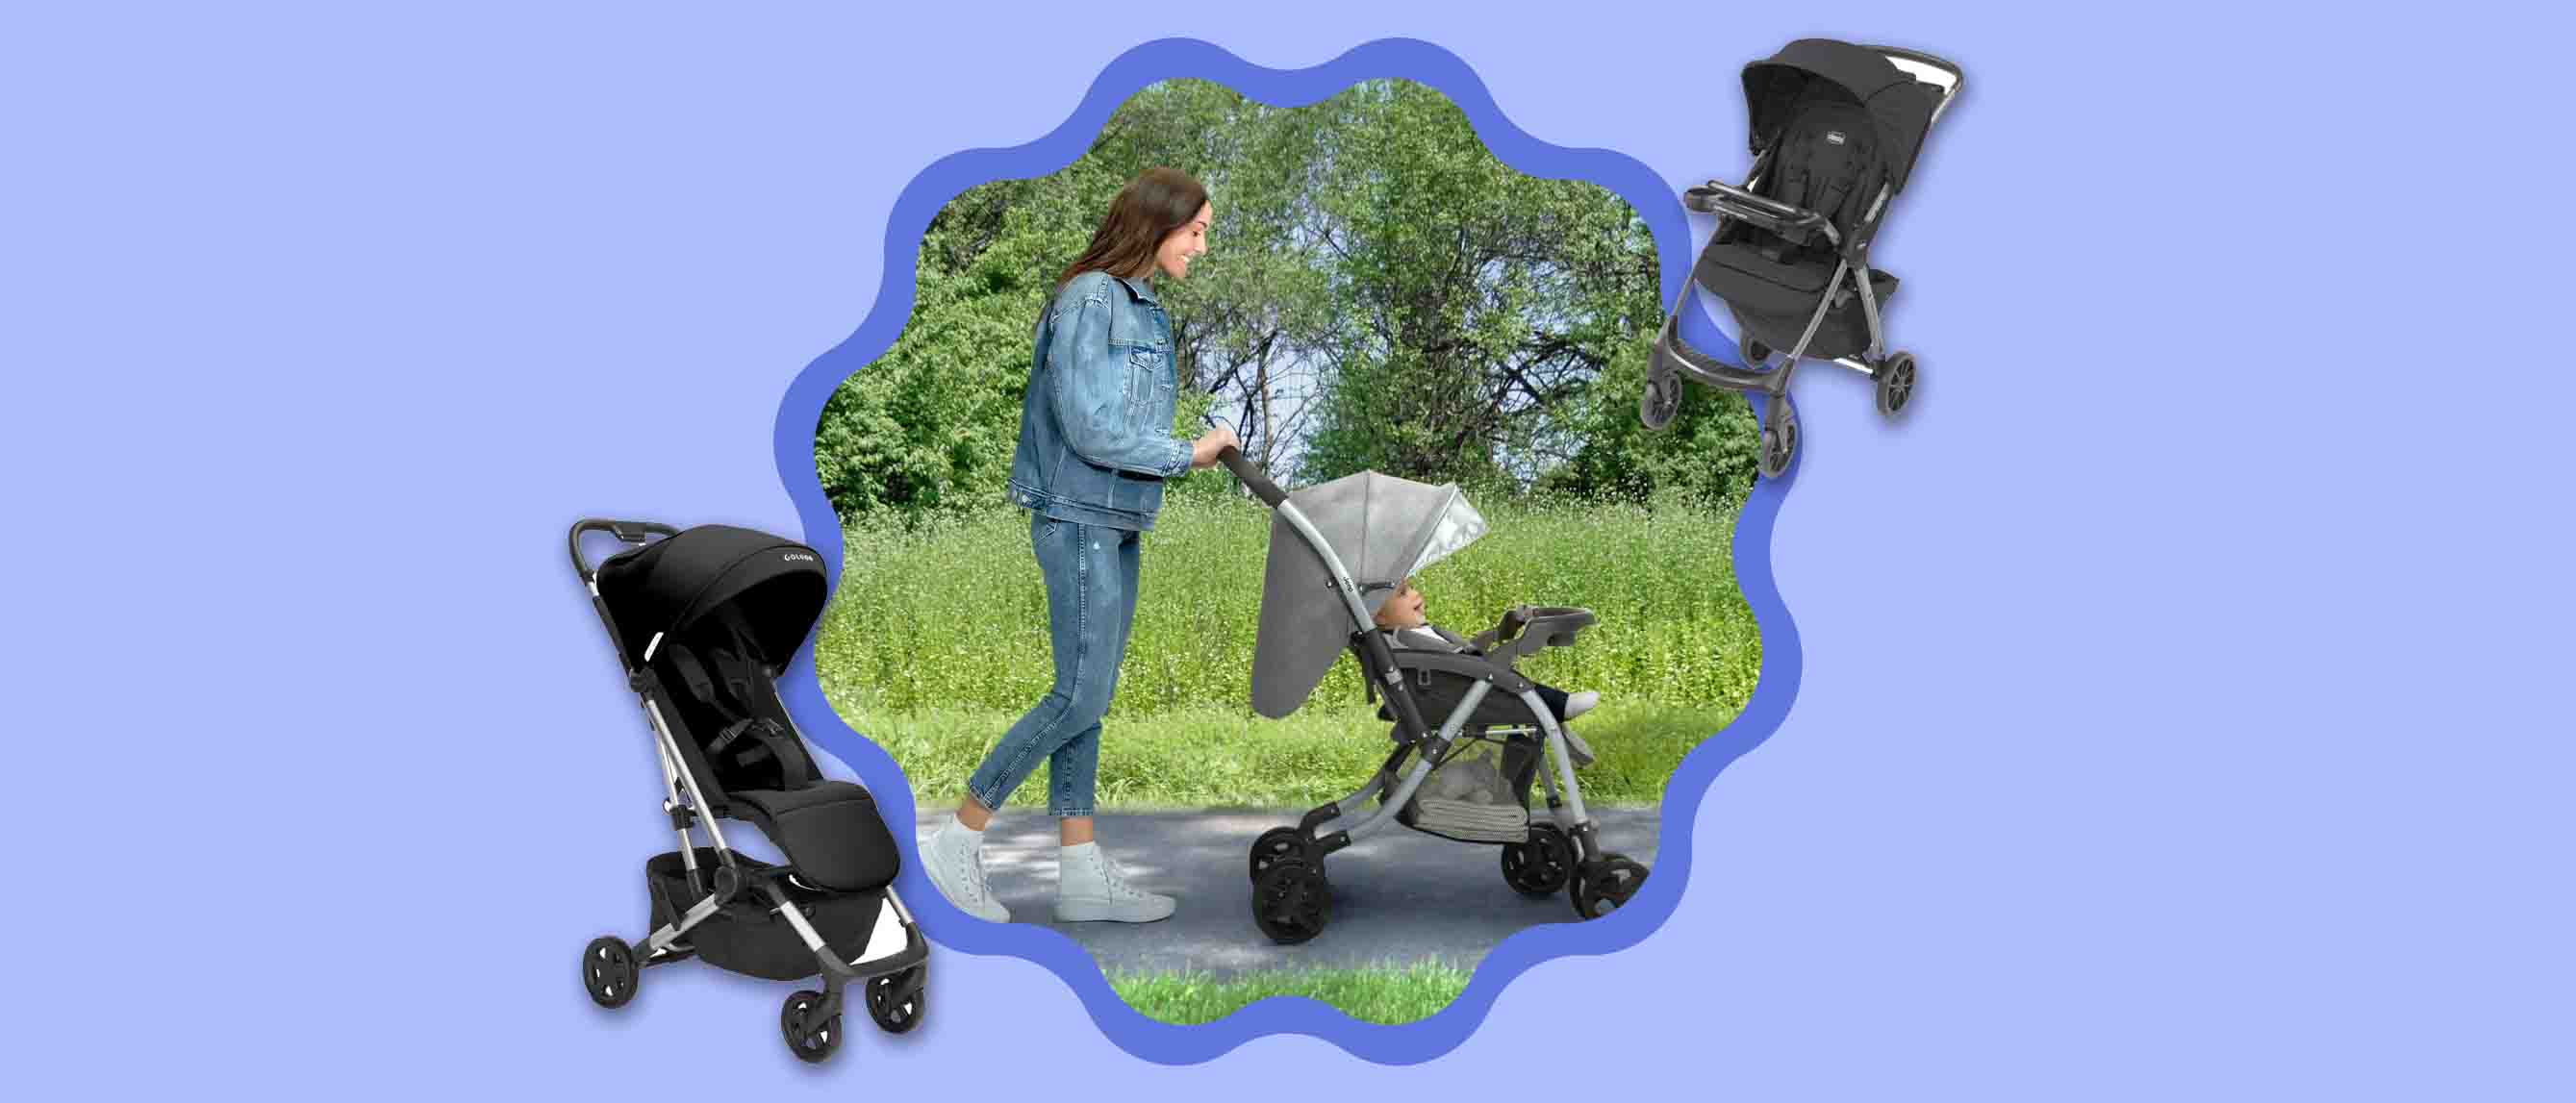 Image of mom pushing stroller and 2 black strollers